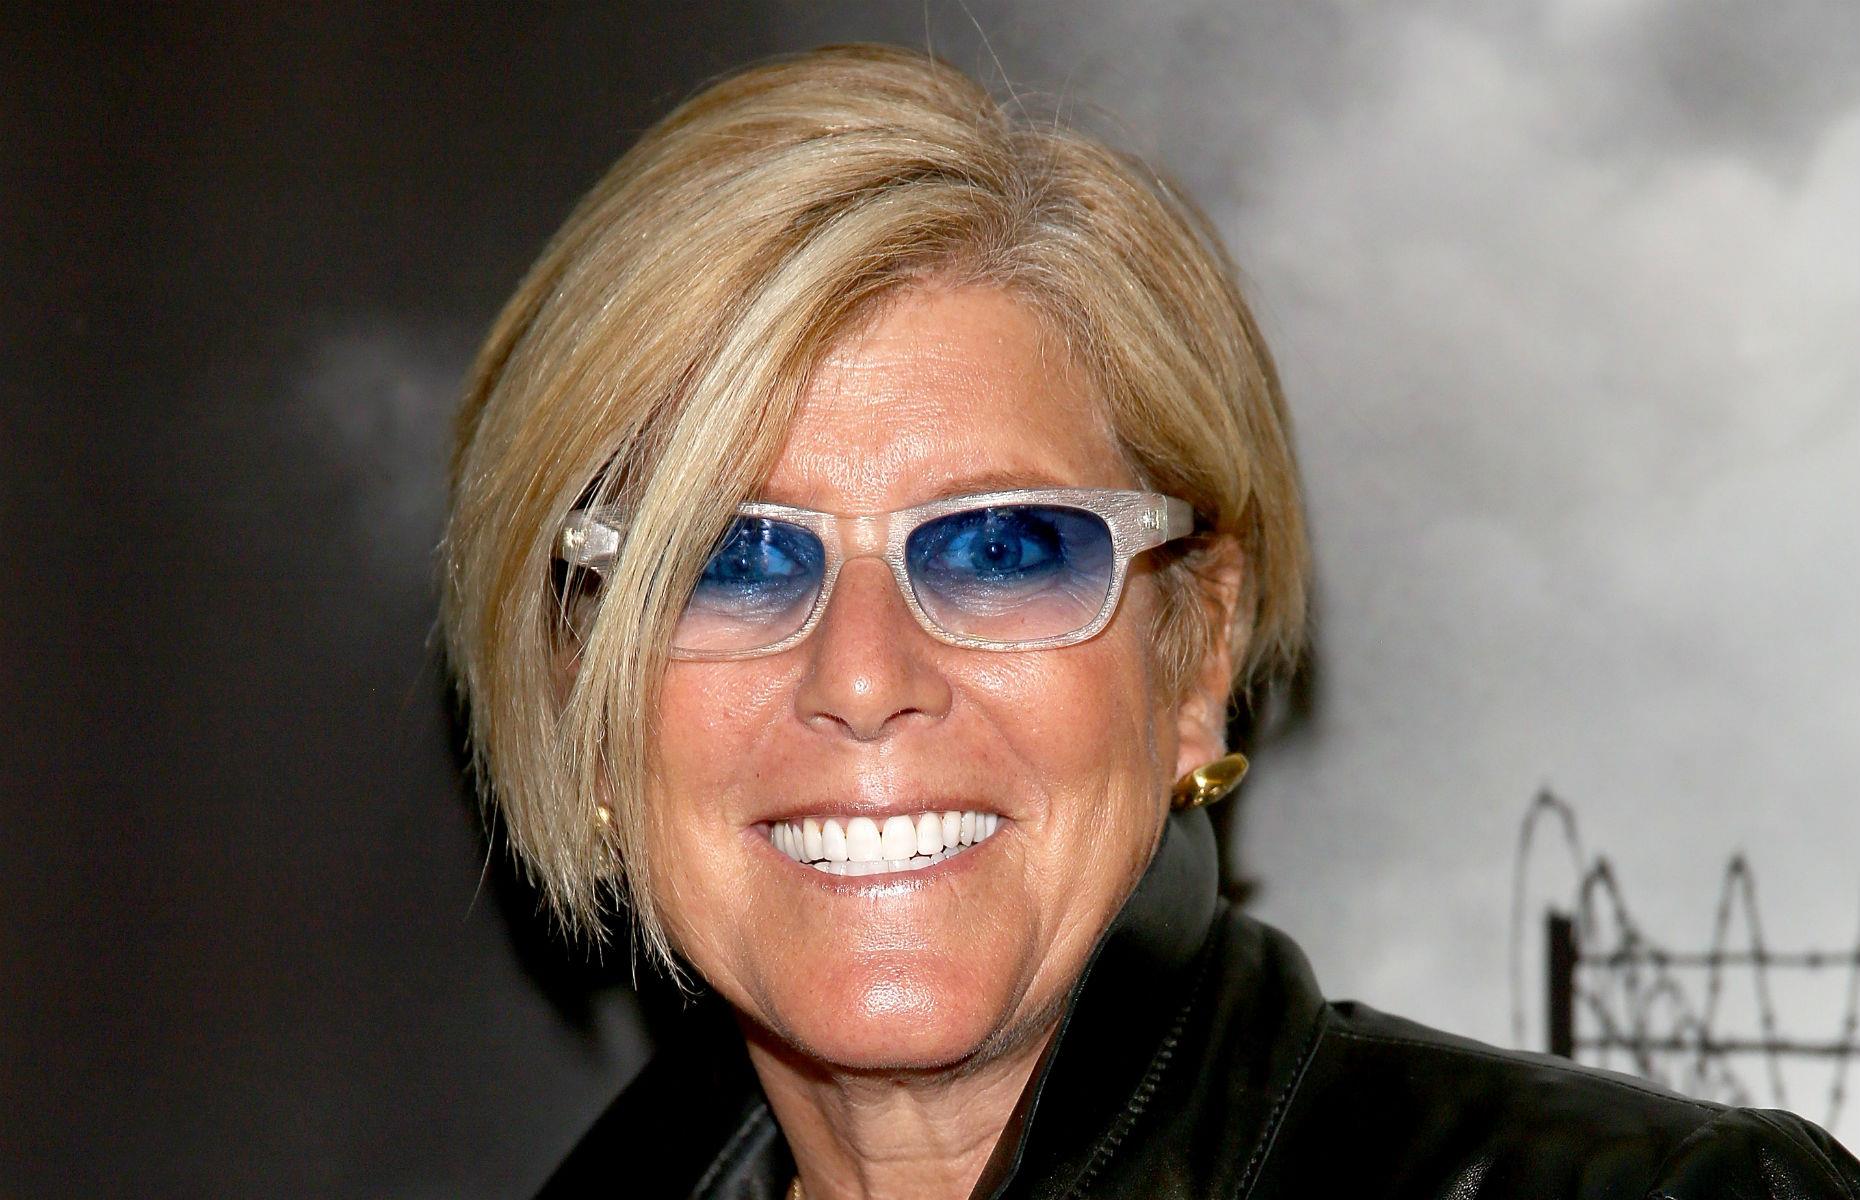 Suze Orman – With success comes unhelpful criticism; ignore it